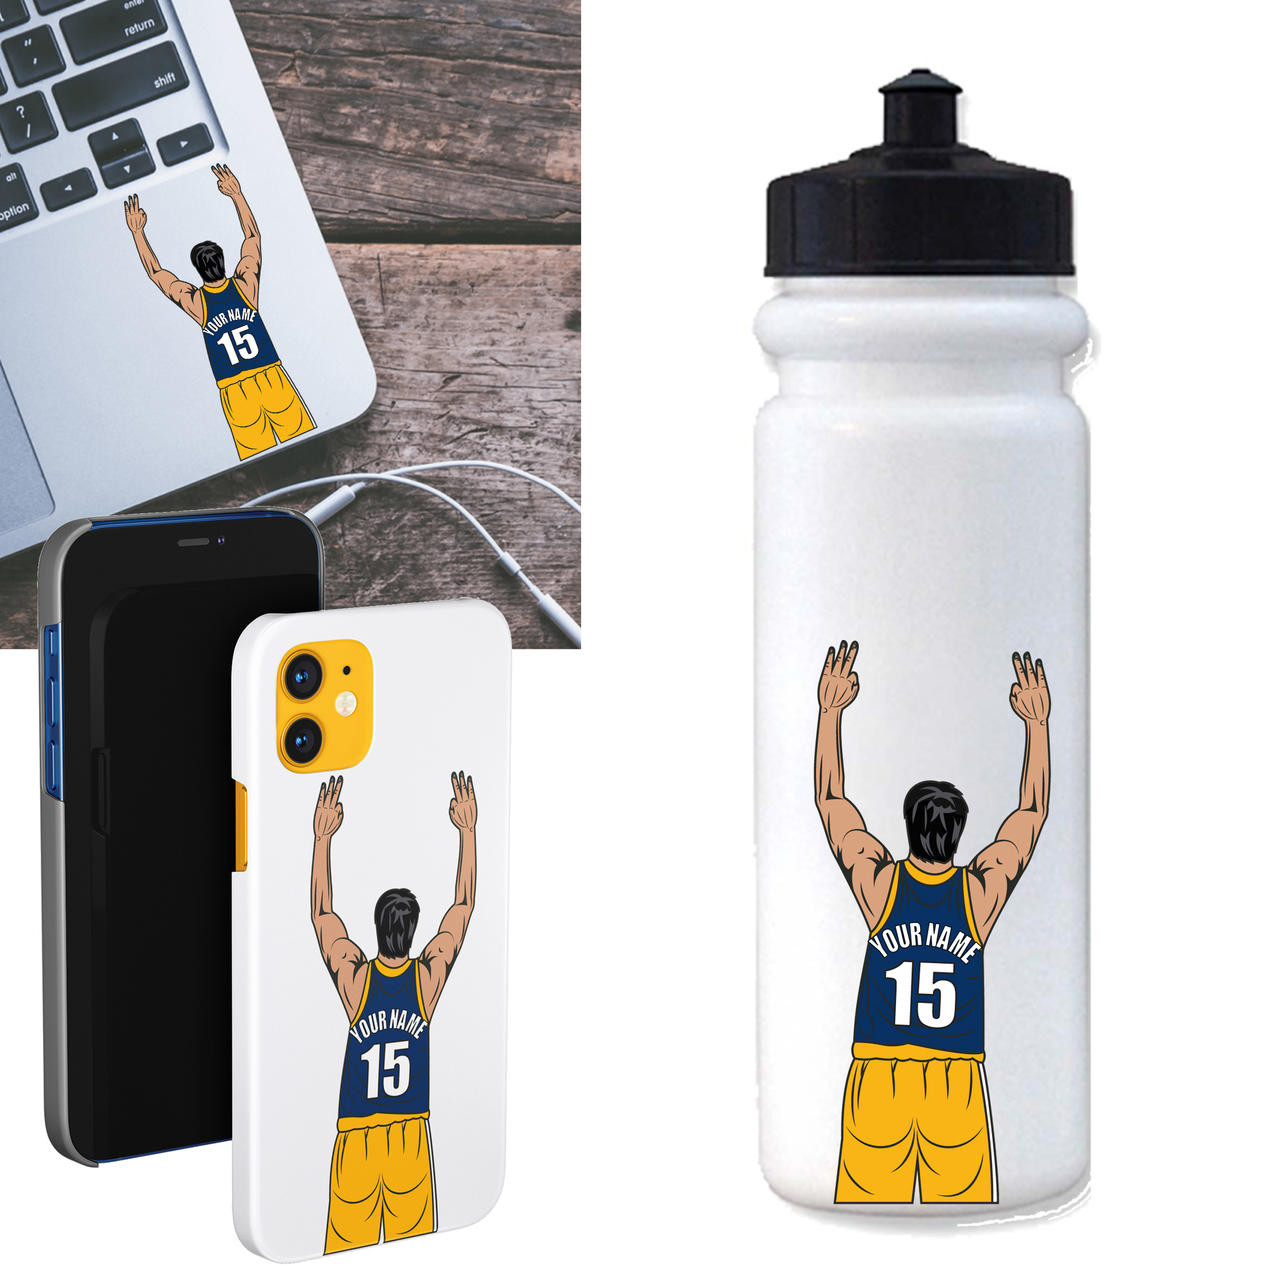 Stinky Lockers 6 Pack Personalized Basketball Stickers-3 Point Decals for Water Bottle or Laptop or or Cell Phone